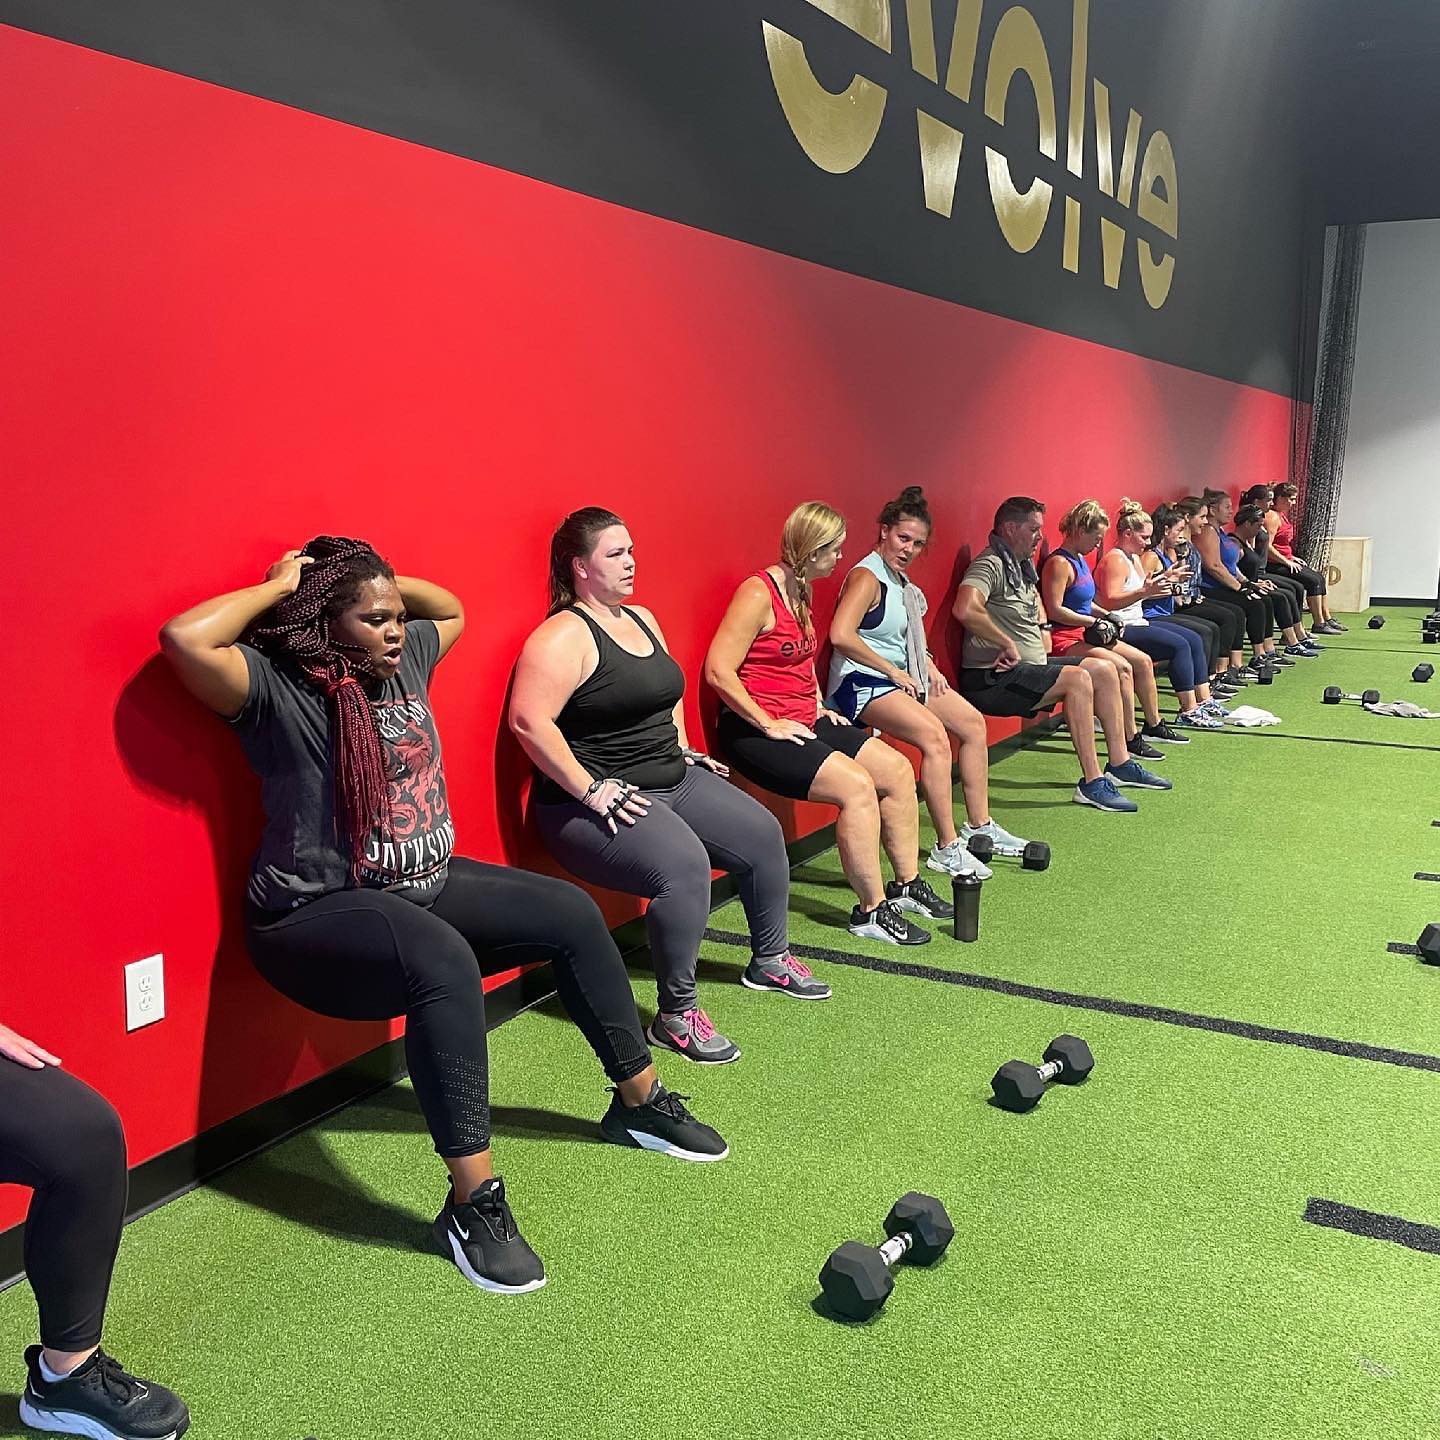 Evolve Movement Therapy Group Workout